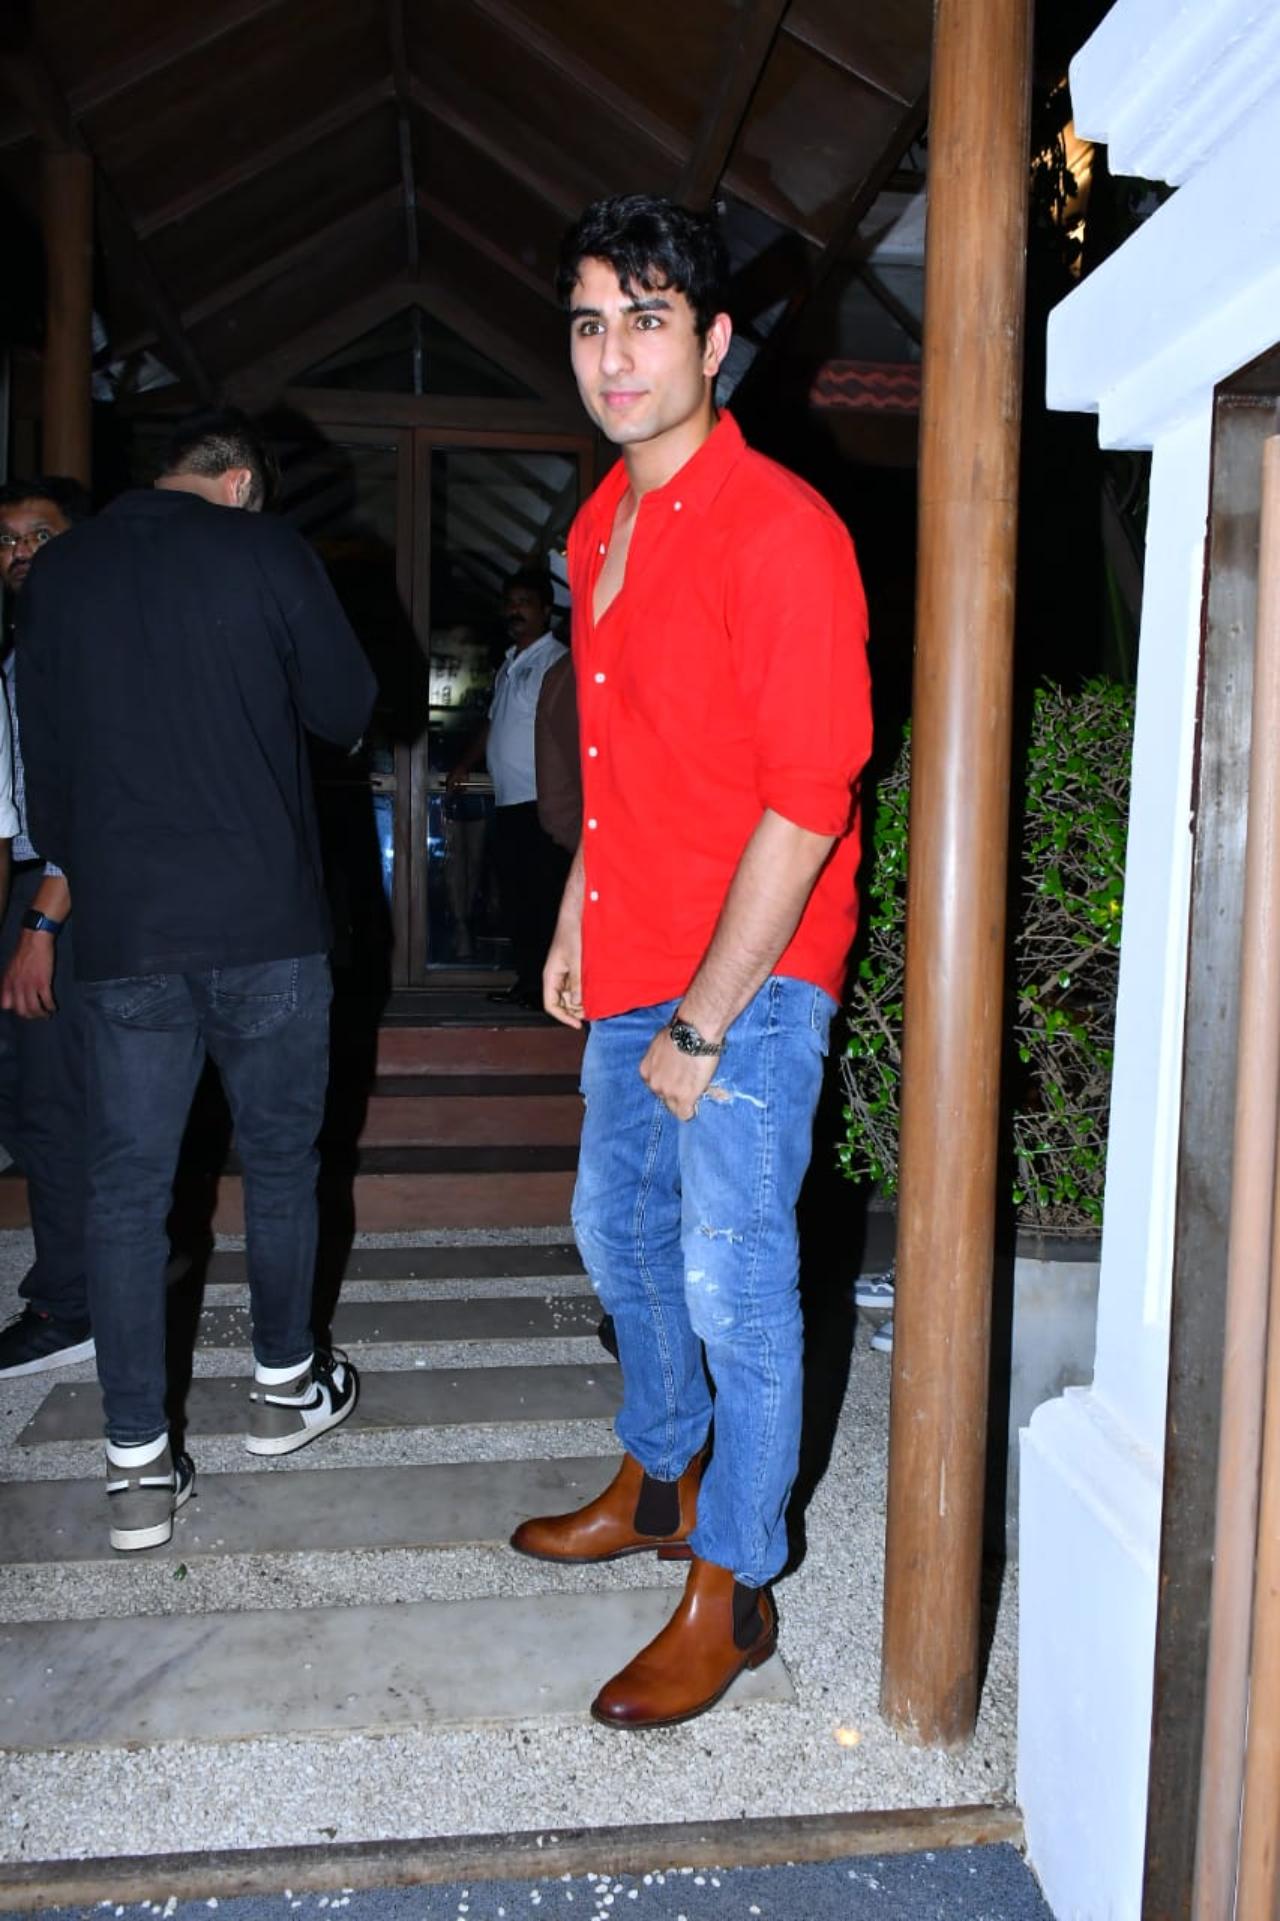 Saif Ali Khan and Amrita Singh's son Ibrahim Ali Khan was also present at the party. Dressed in a bright red shirt and jeans, the young man was seen posing for the paparazzi before he headed into the party. Ibrahim recently worked as an assistant to Karan on his upcoming film 'Rocky Aur Rani Ki Prem Kahani'